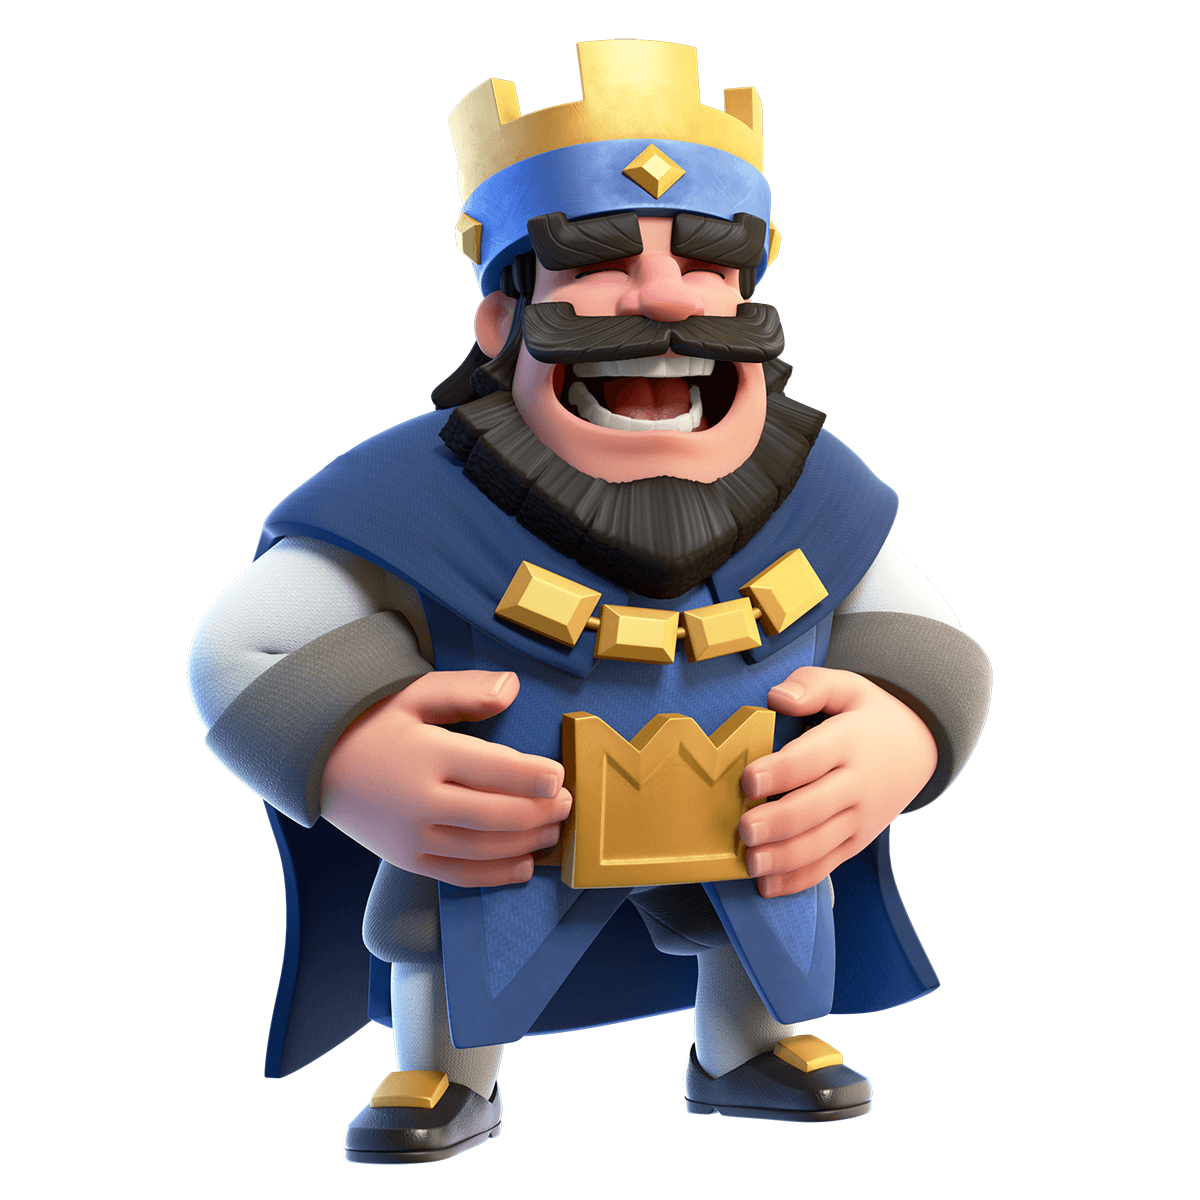 Zip] Download Clash Royale HD wallpapers and Pictures for PC and …